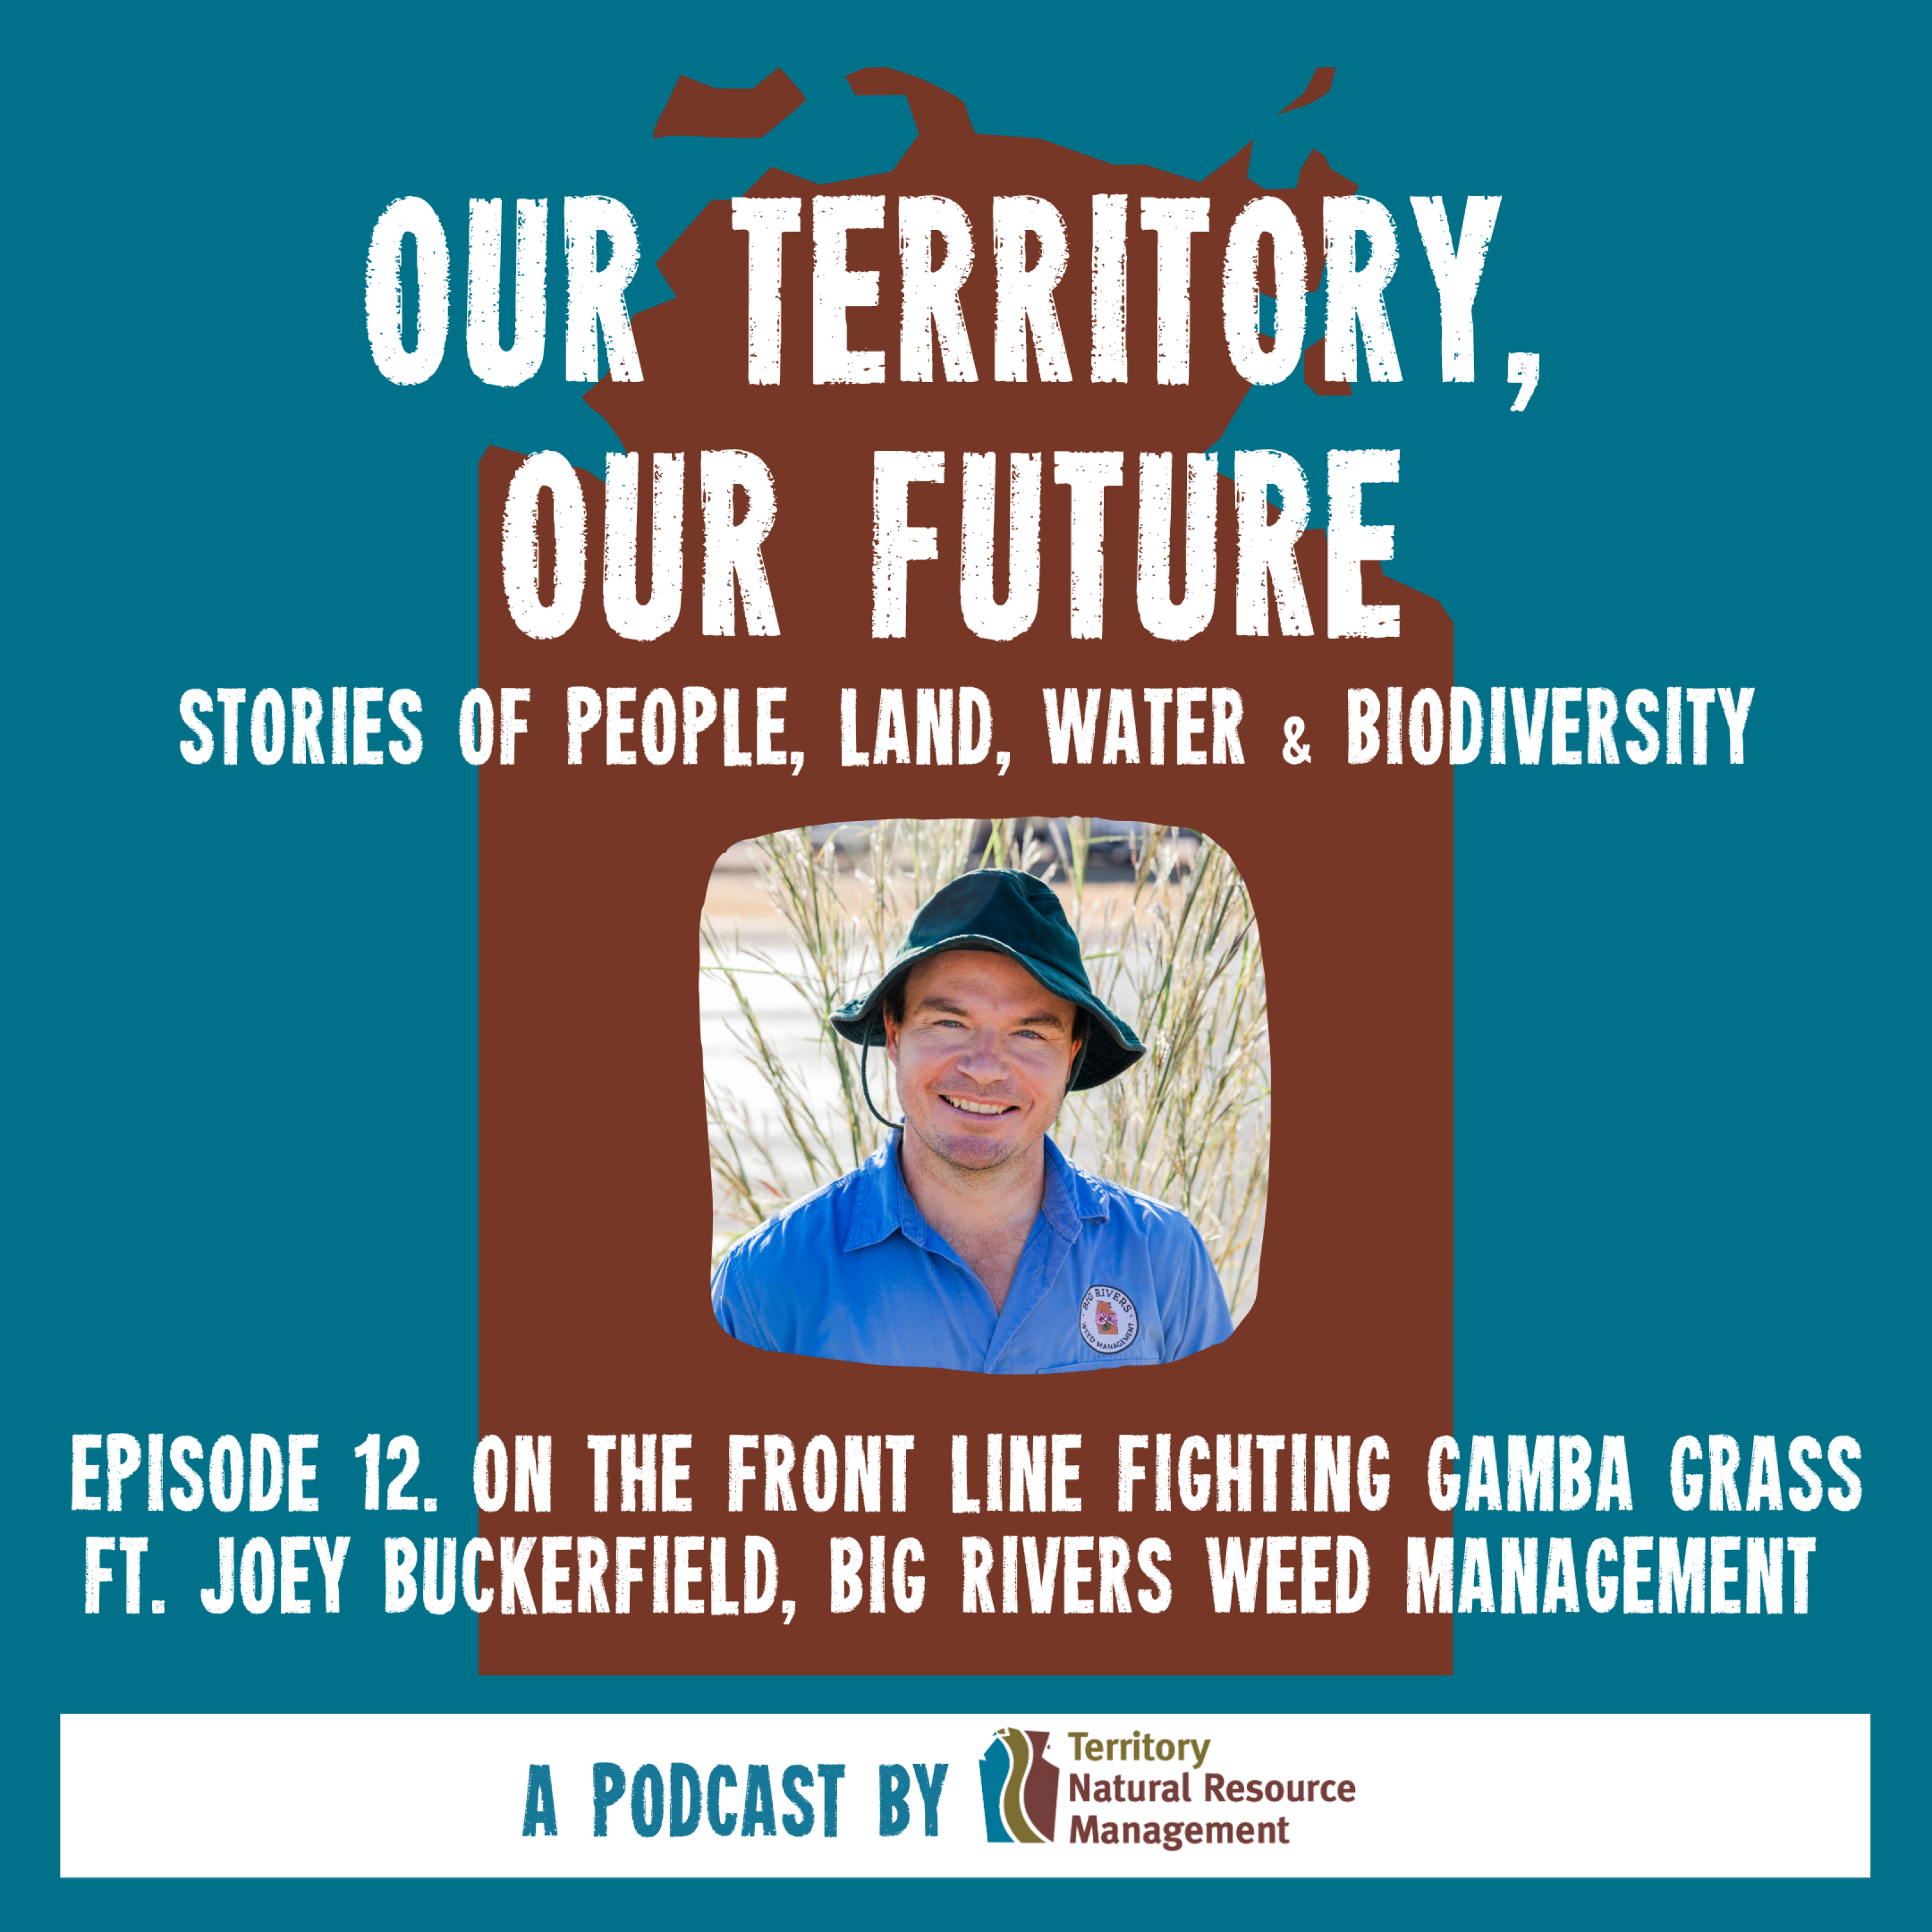 On the front line fighting Gamba grass (Part 4) ft. Joey Buckerfield, Big Rivers Weed Management